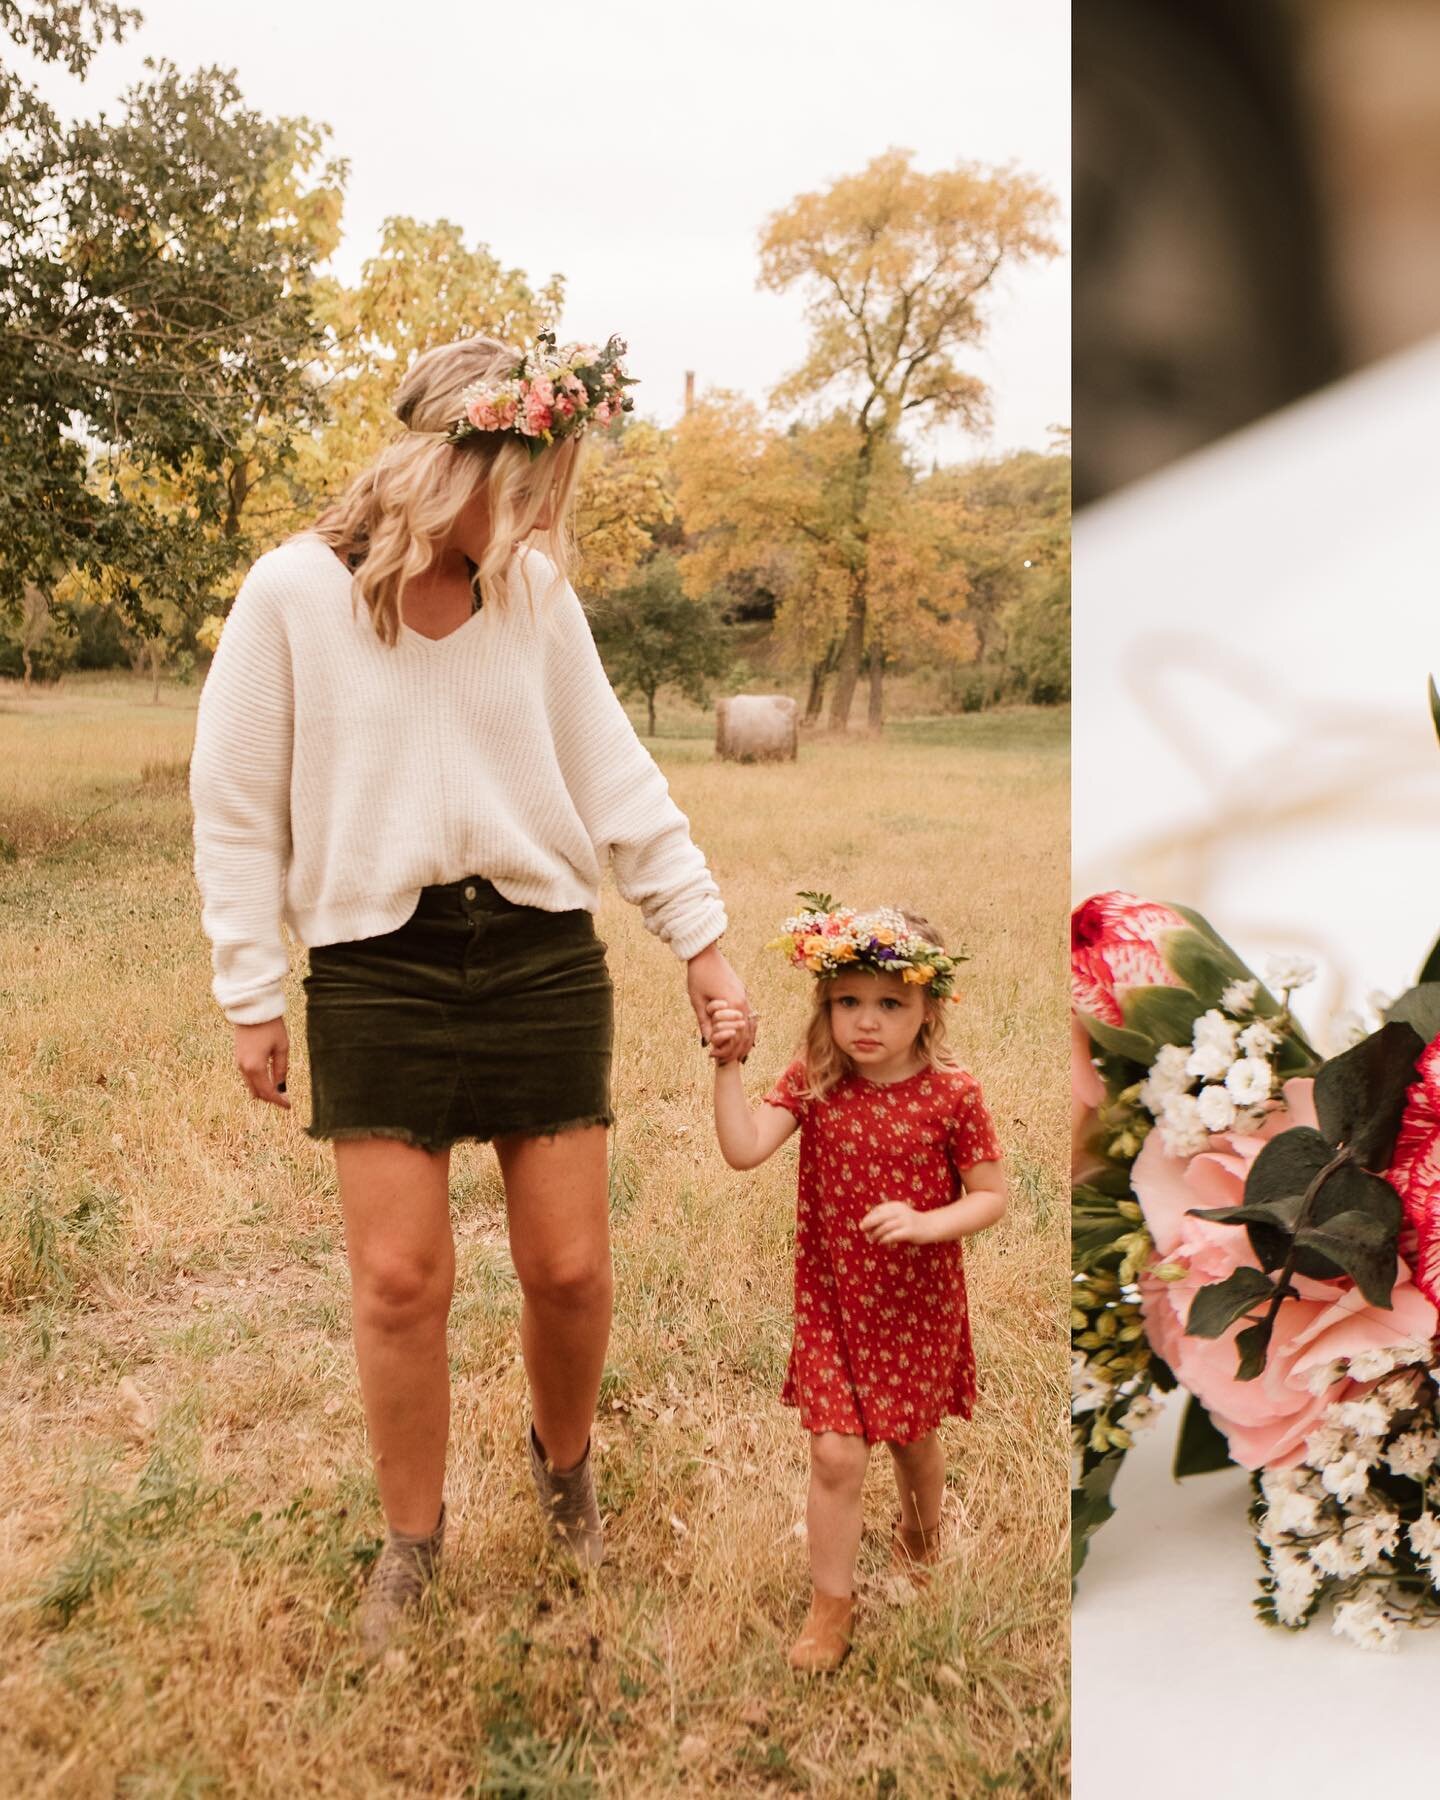 It&rsquo;s that time of year again! Flower crown sessions are scheduled for September 24! Bookings always fill up super fast, so make sure to snag a spot! 

The deets: 
Pioneers Park
15 minutes
$99
No limit on # of photos delivered 

Grab your favori